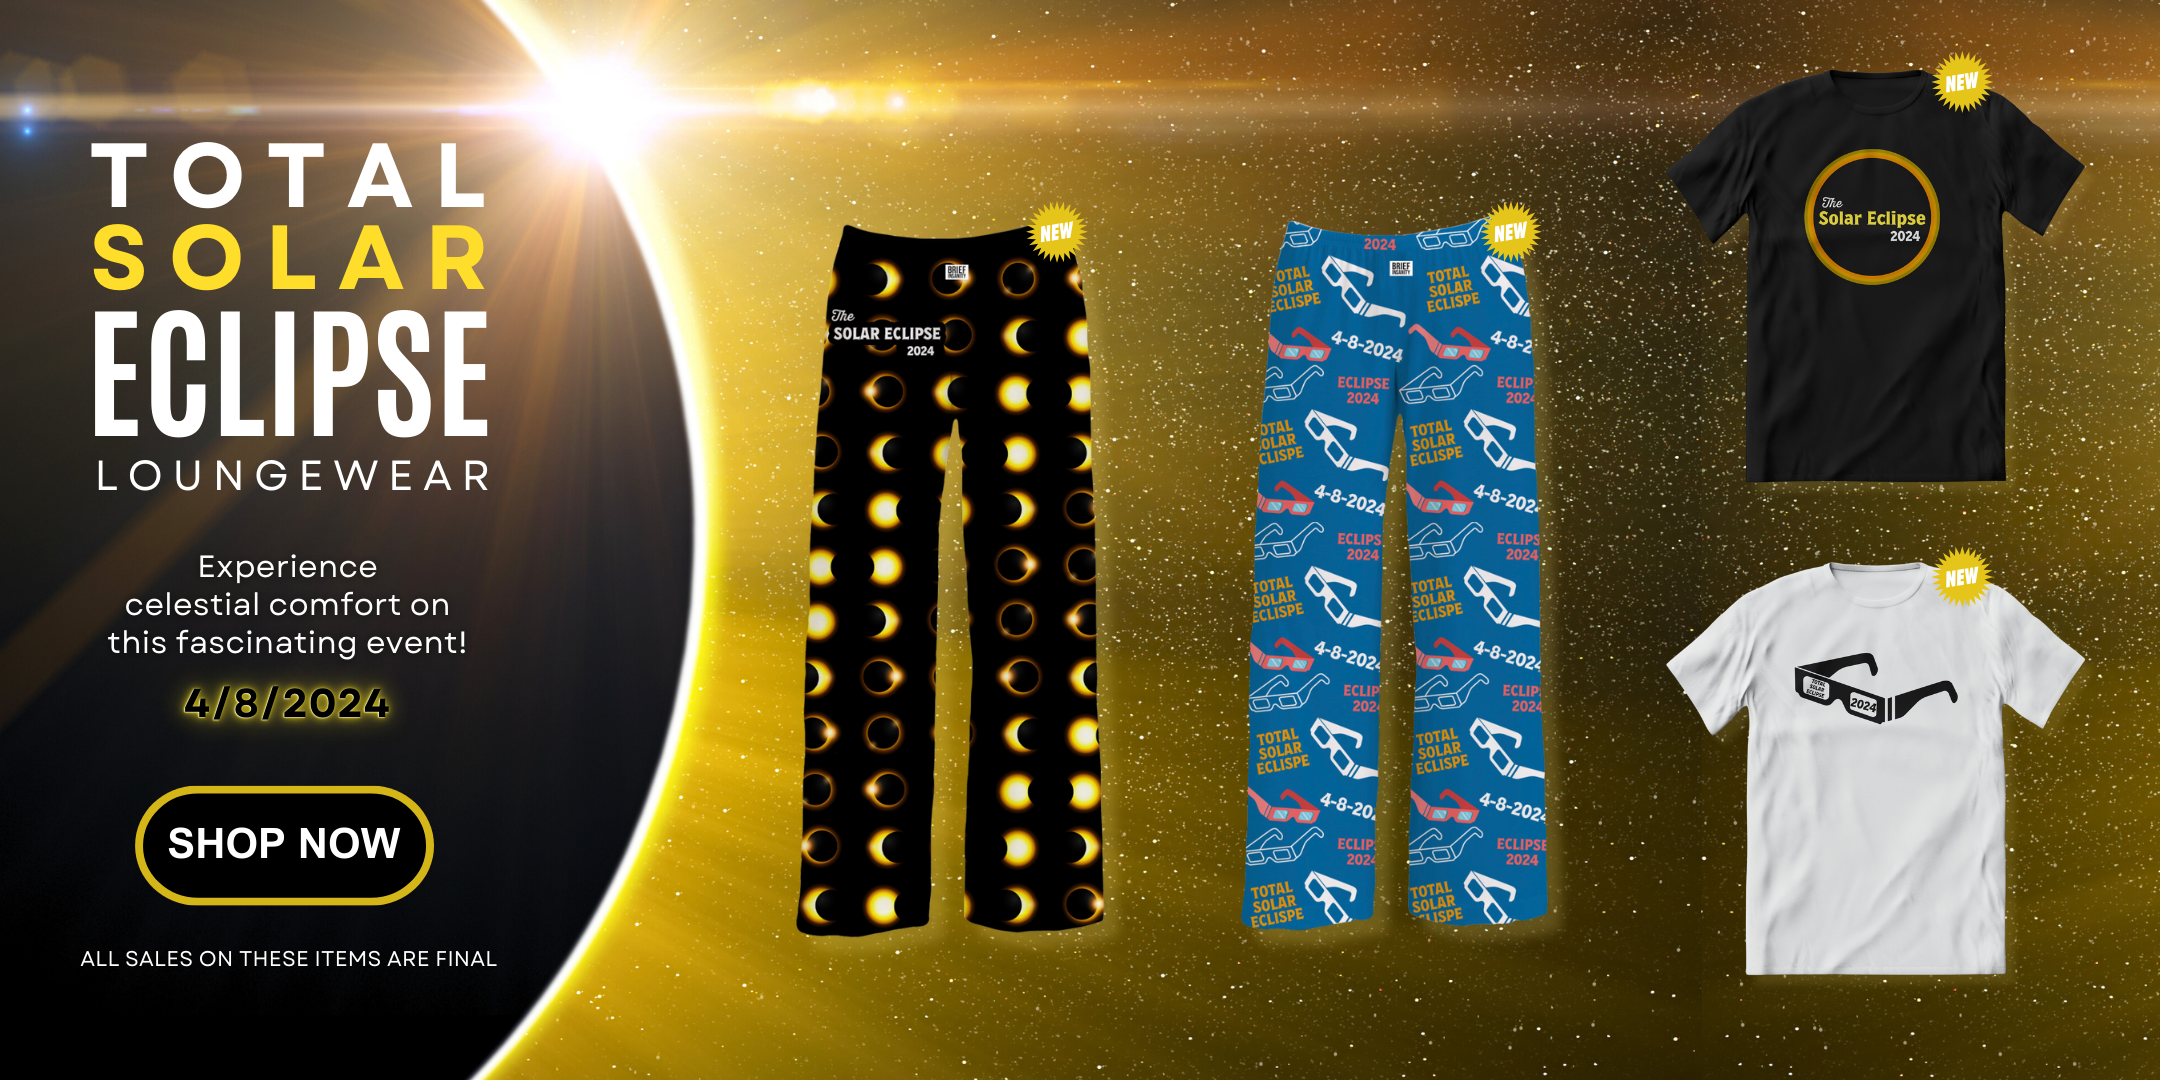 Total Solar Eclipse Loungewear - Experience celestial comfort on this fascinating event! - 4/8/24 - SHOP NOW - ALL SALES ON THESE ITEMS ARE FINAL